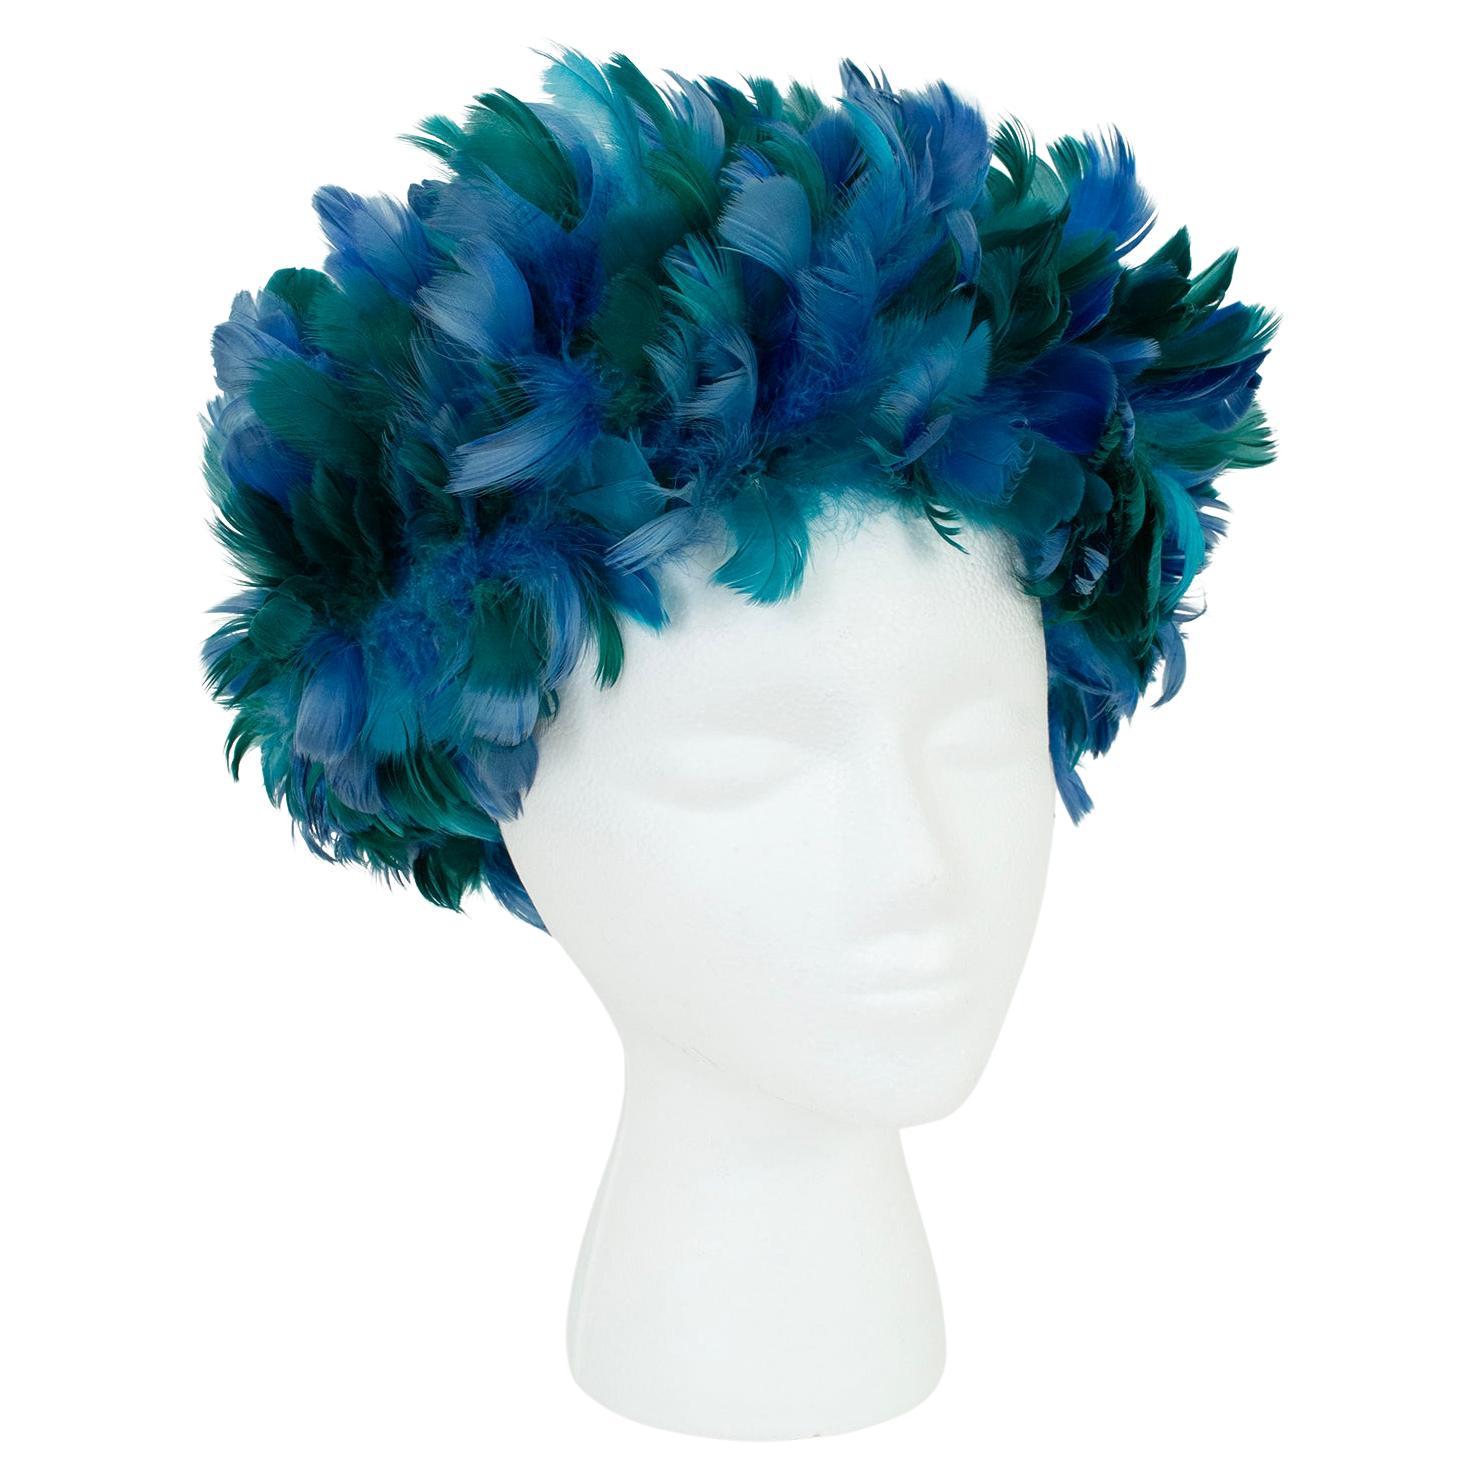 New Blue-Green Ombré Feather Afro Bubble Turban Hat, Haiti – One Size, 1960s